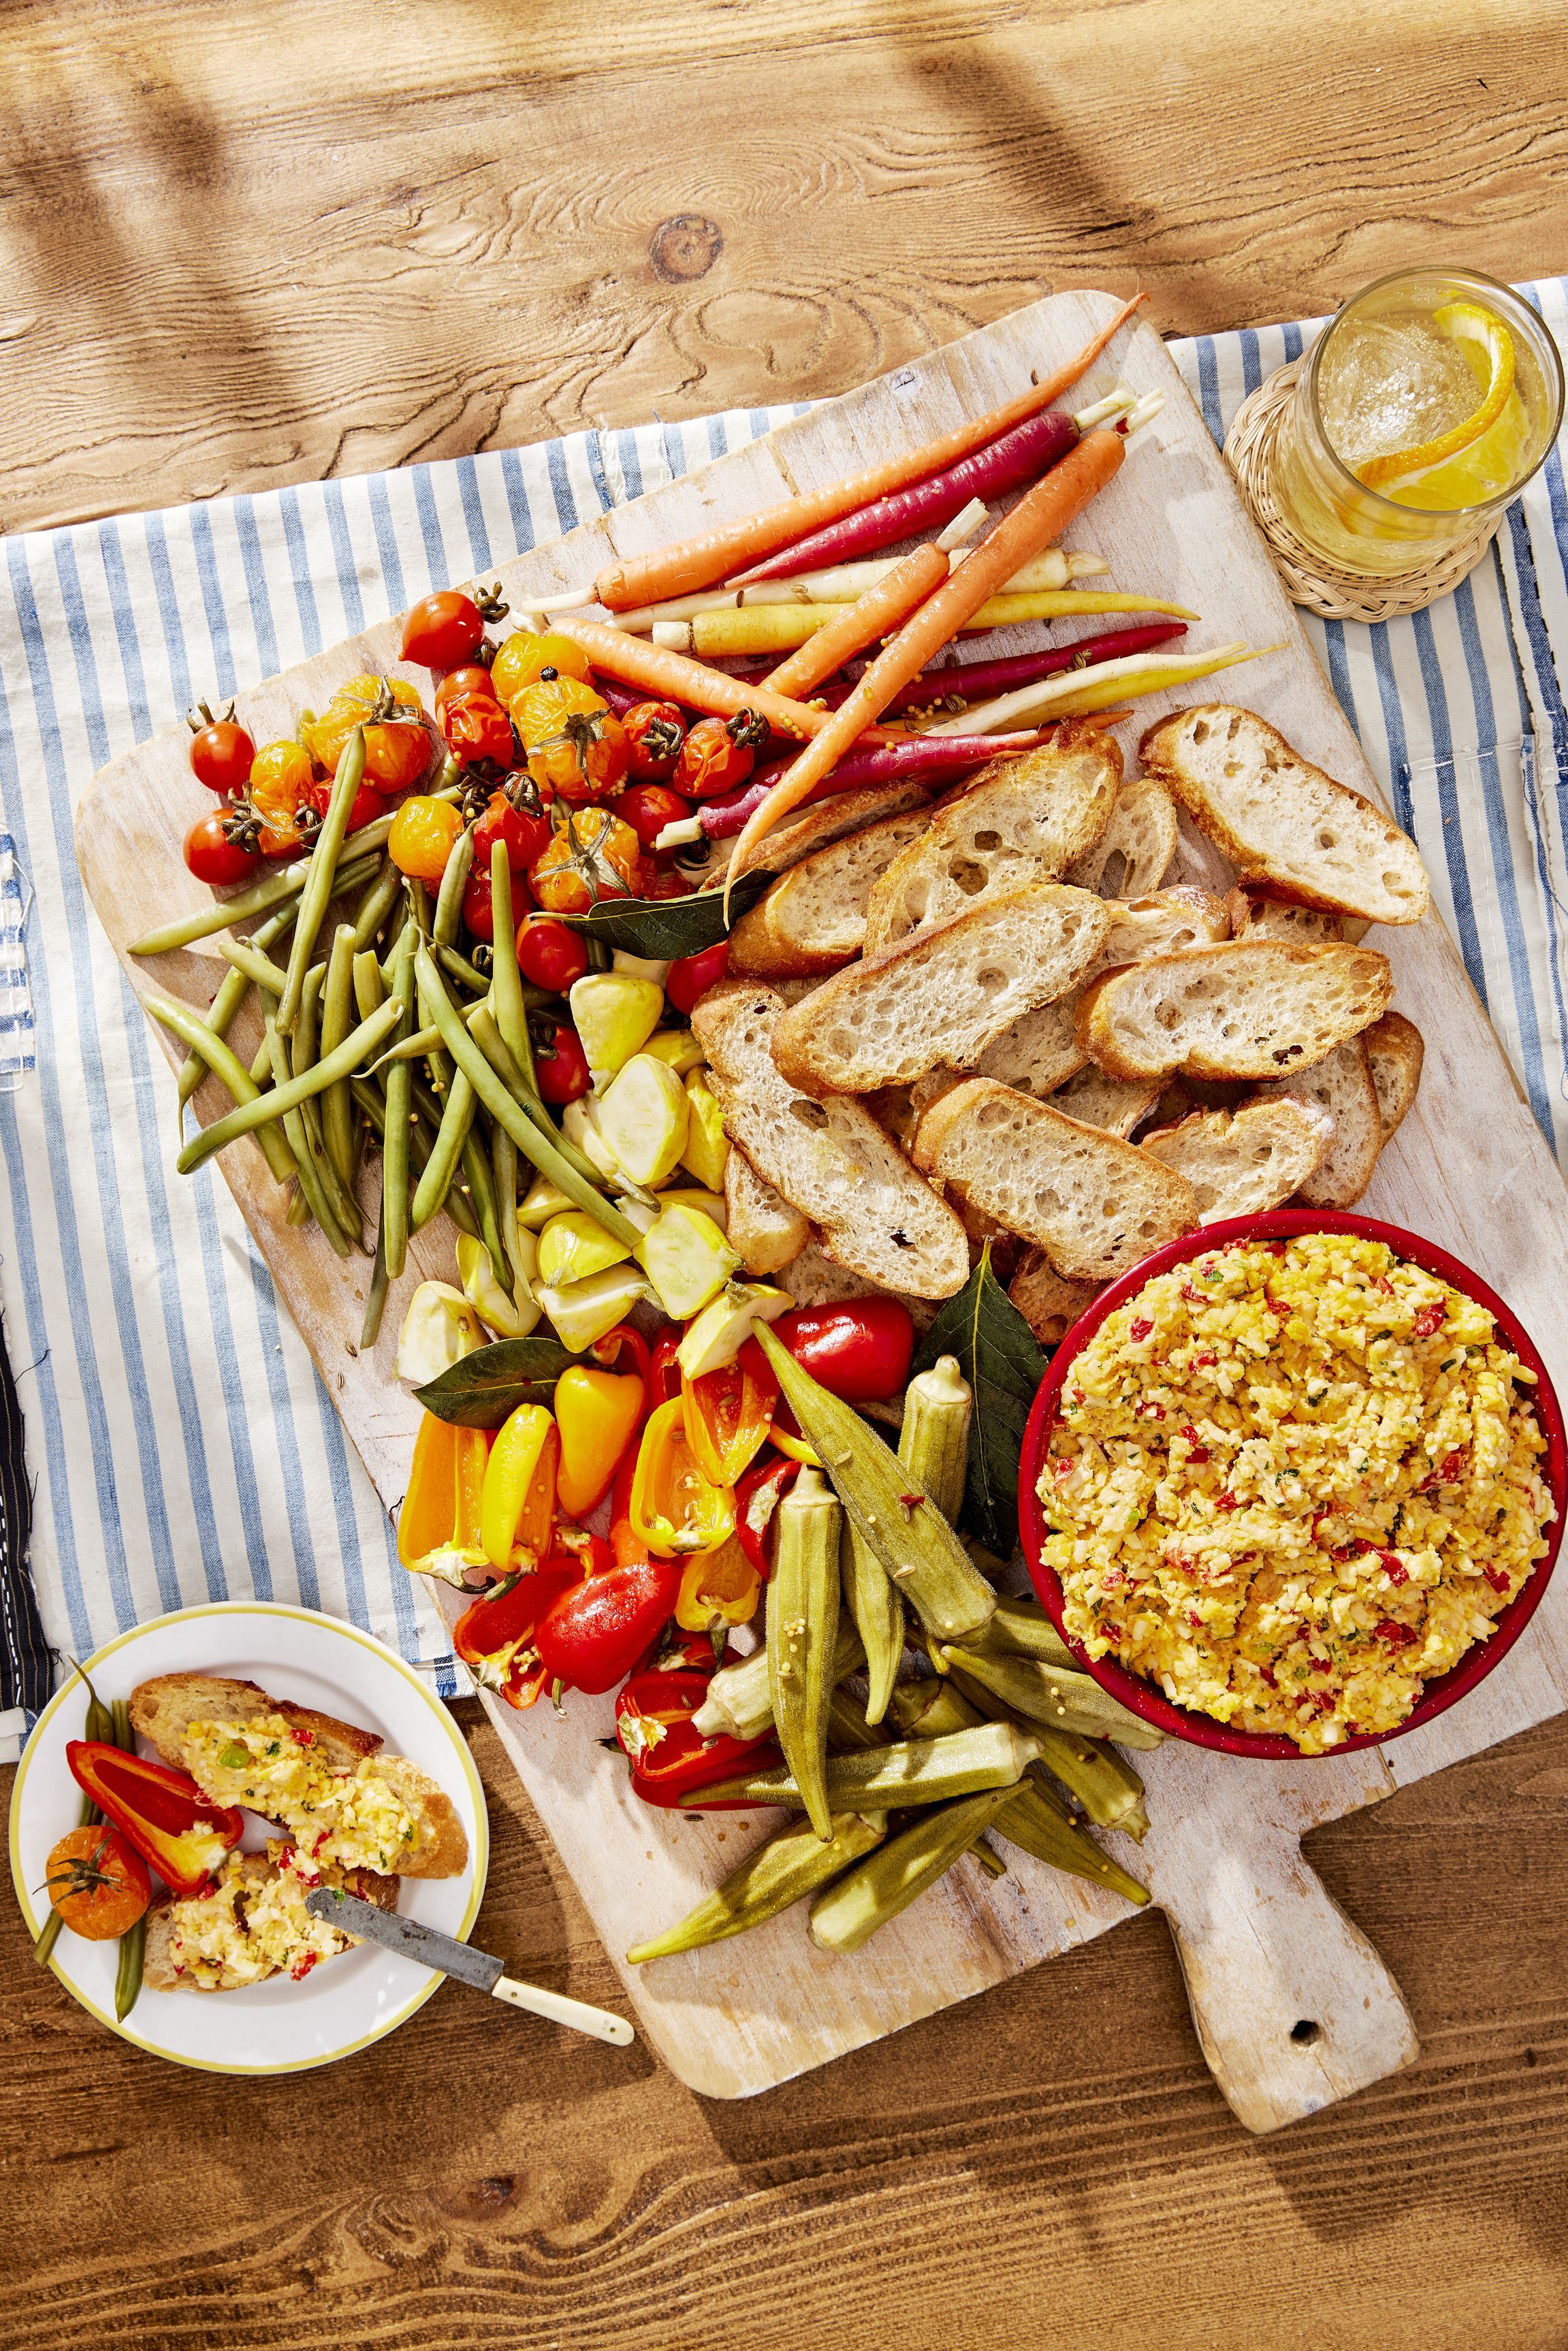 https://hips.hearstapps.com/hmg-prod/images/work-lunch-ideas-pimento-cheese-with-pickles-1674835206.jpg